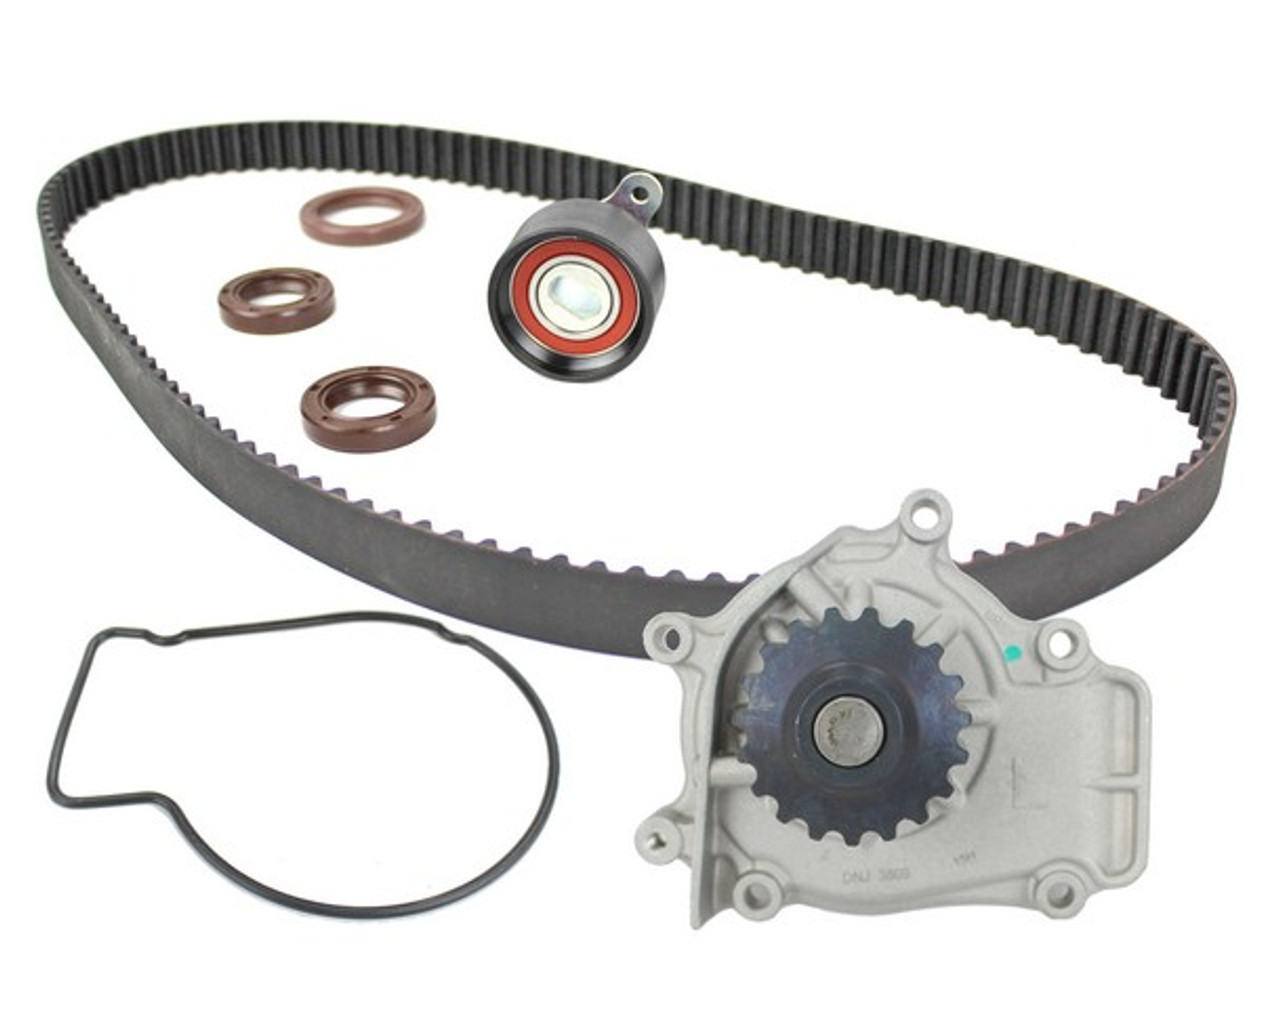 1990 Honda Prelude 2.0L Timing Belt Kit with Water Pump TBK209WP.E4